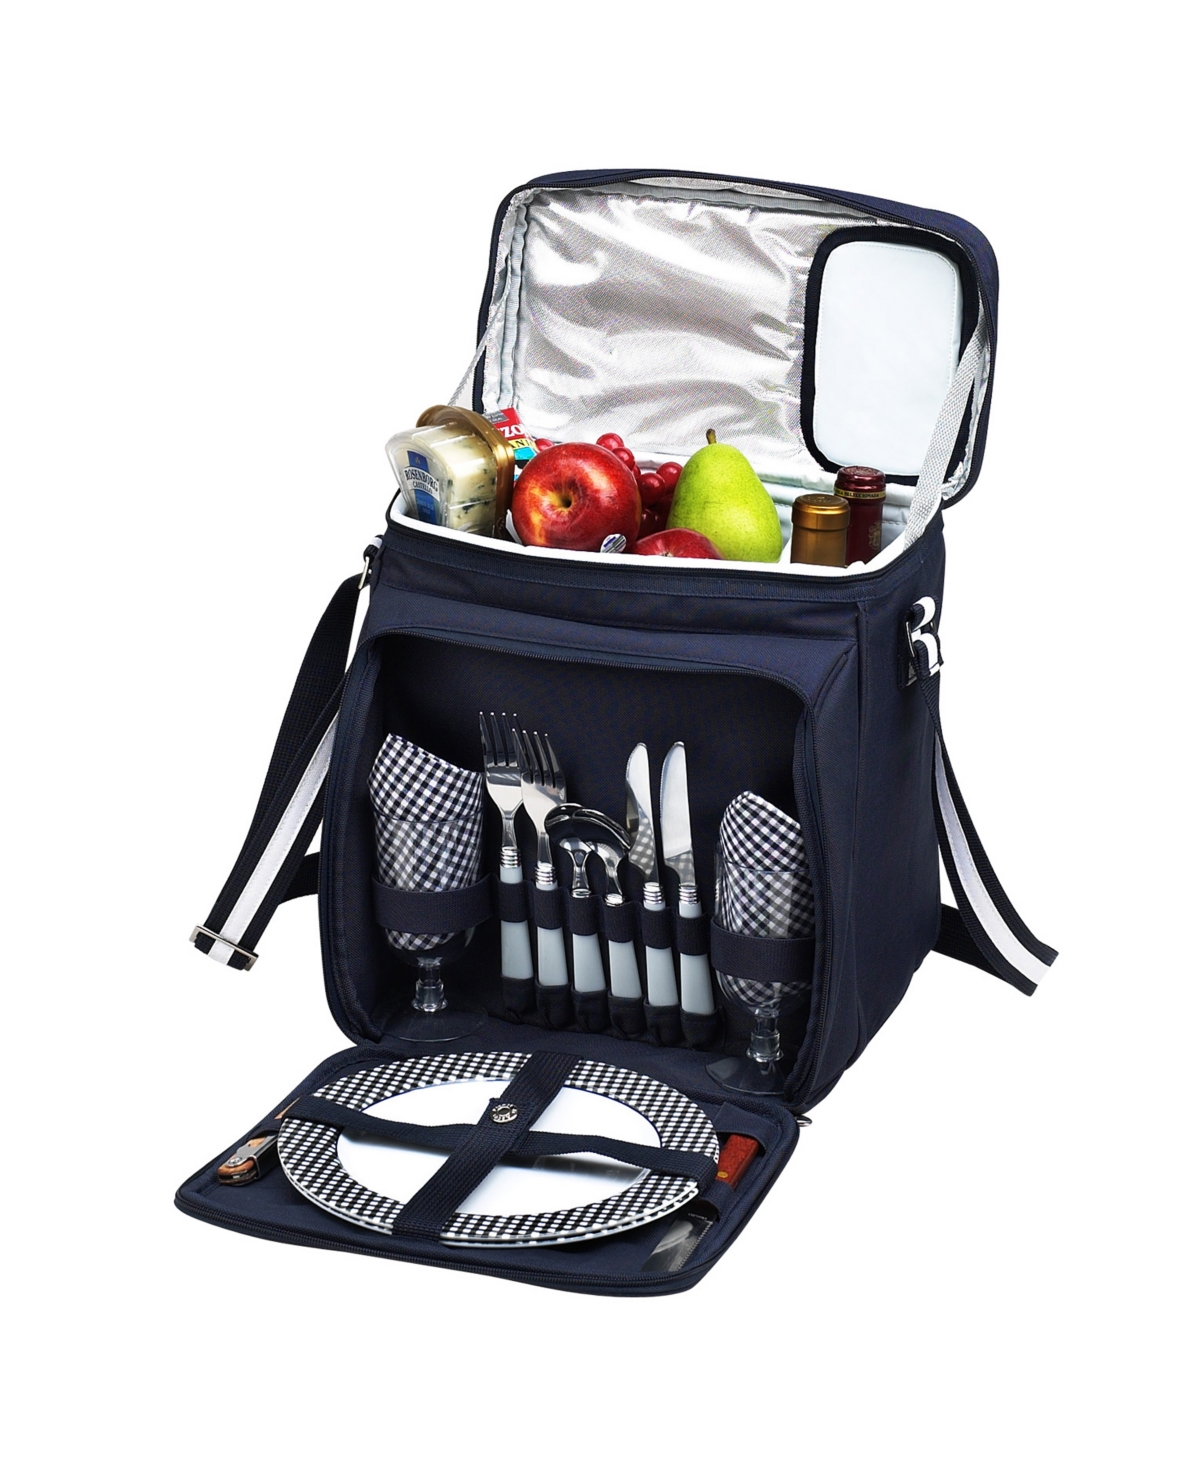 Insulated Picnic Basket, Cooler Equipped with Service for 2 - Yellow